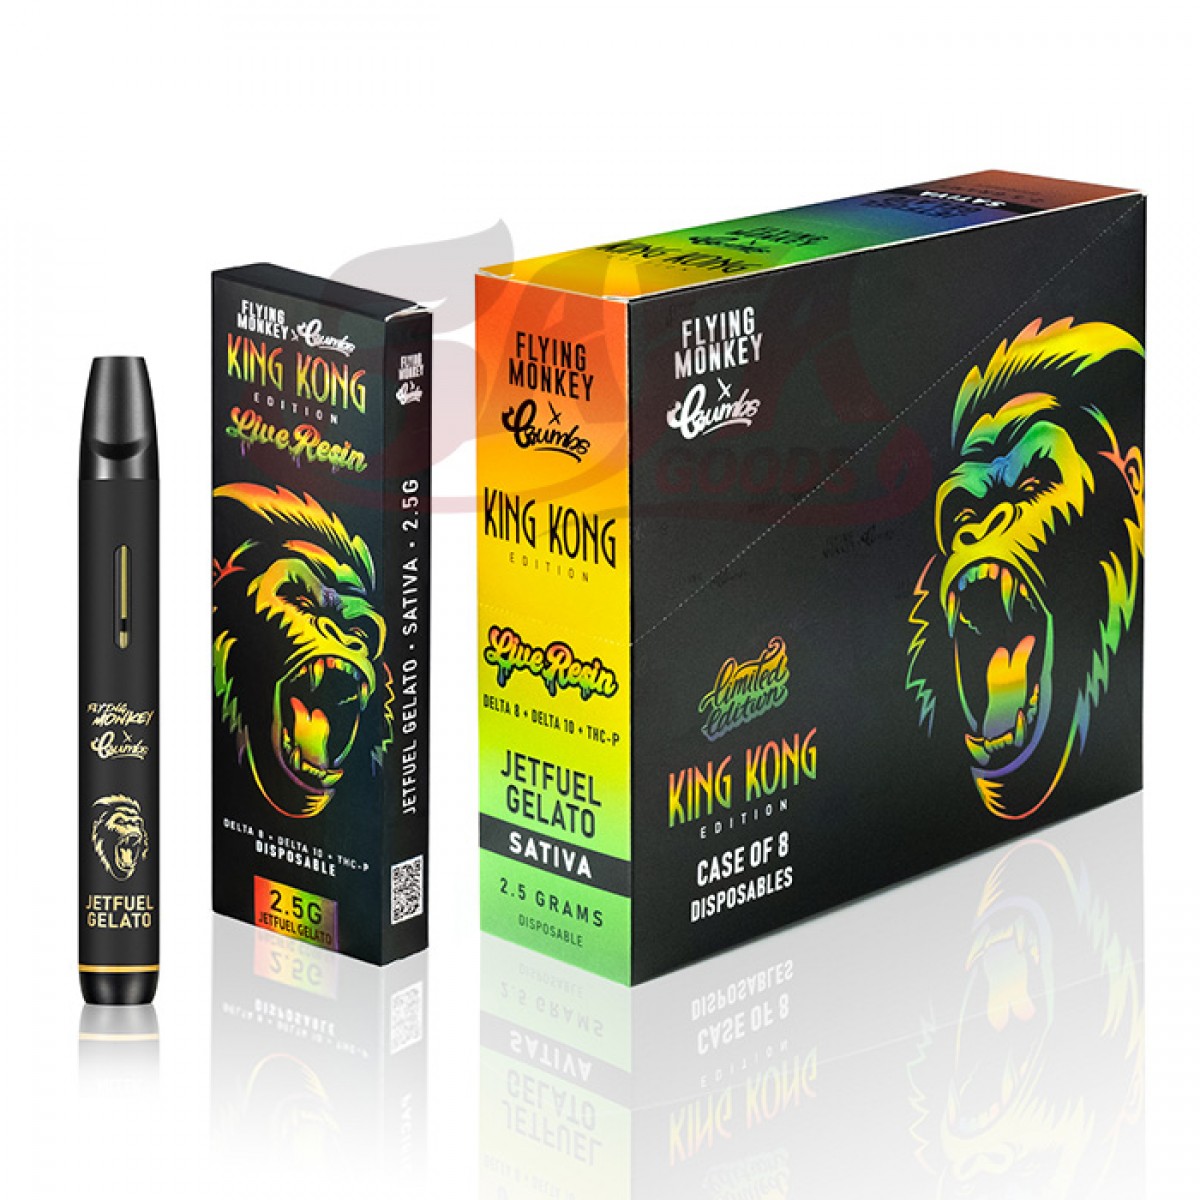 Flying Monkey / Crumbs KING KONG Live Resin 2.5G Disposable [SINGLE UNIT]